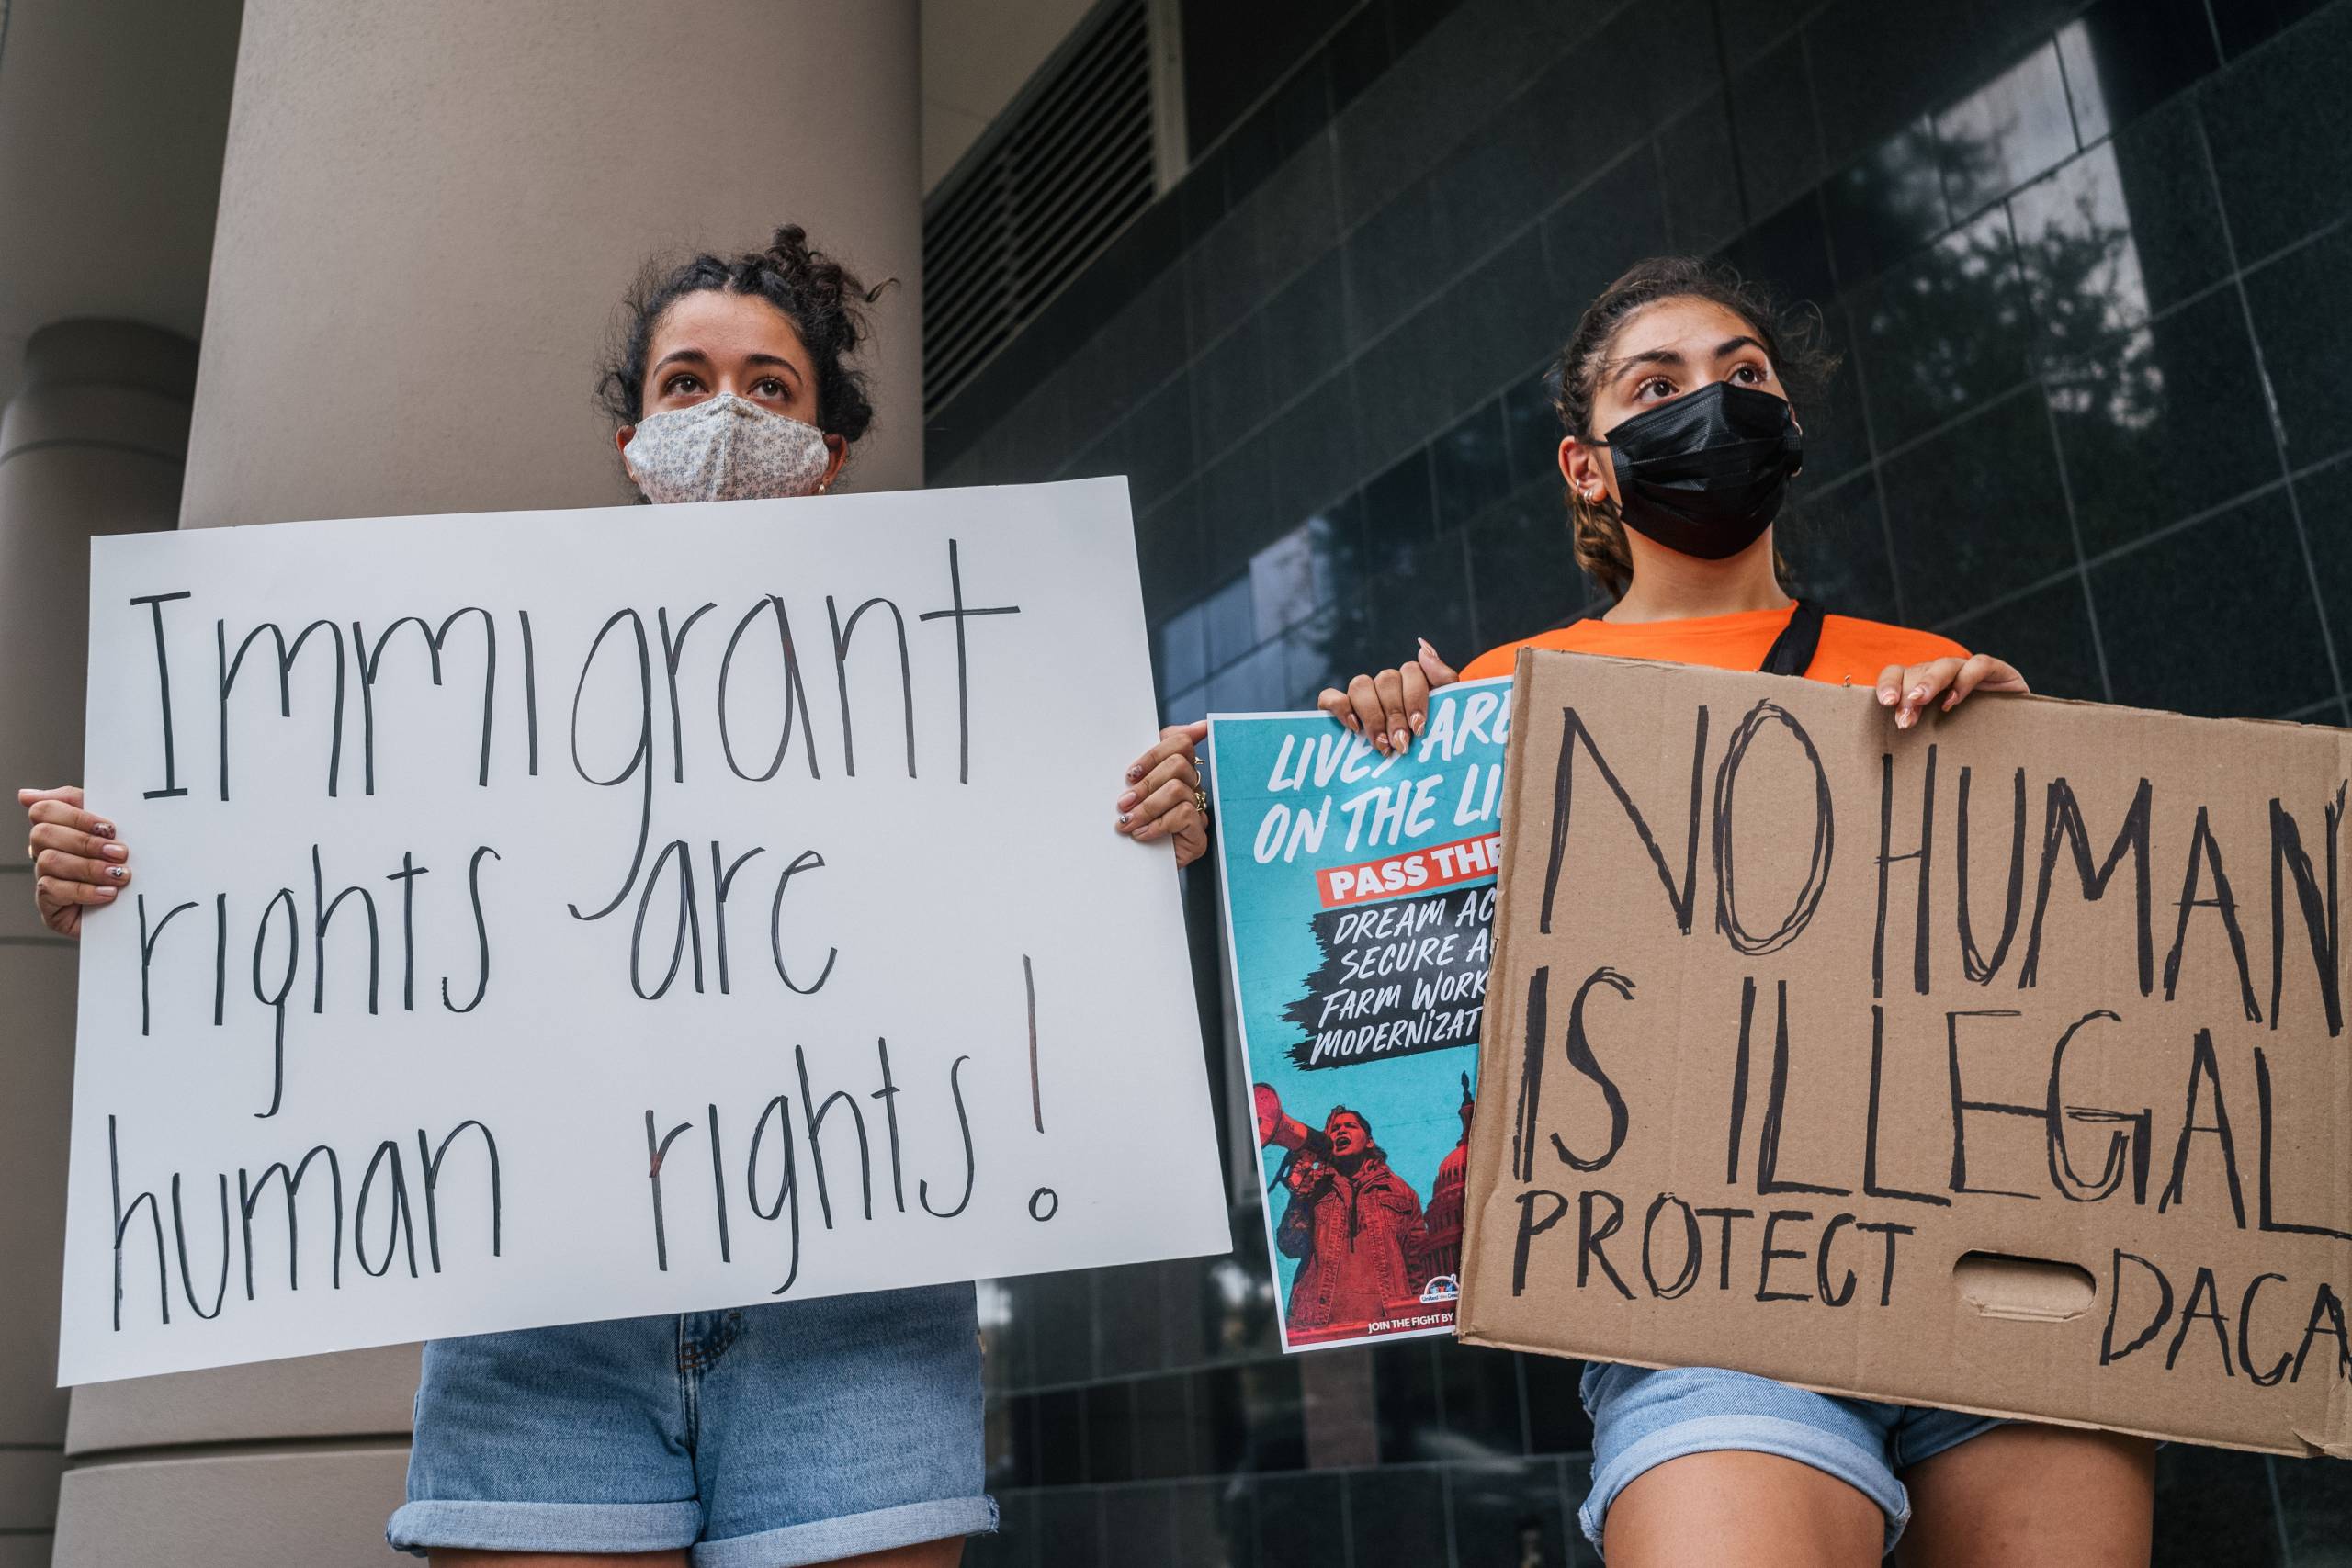 Two people wearing facemasks hold up signs that say, 'Immigrant rights are human rights!' and 'No human is illegal. Protect DACA.'